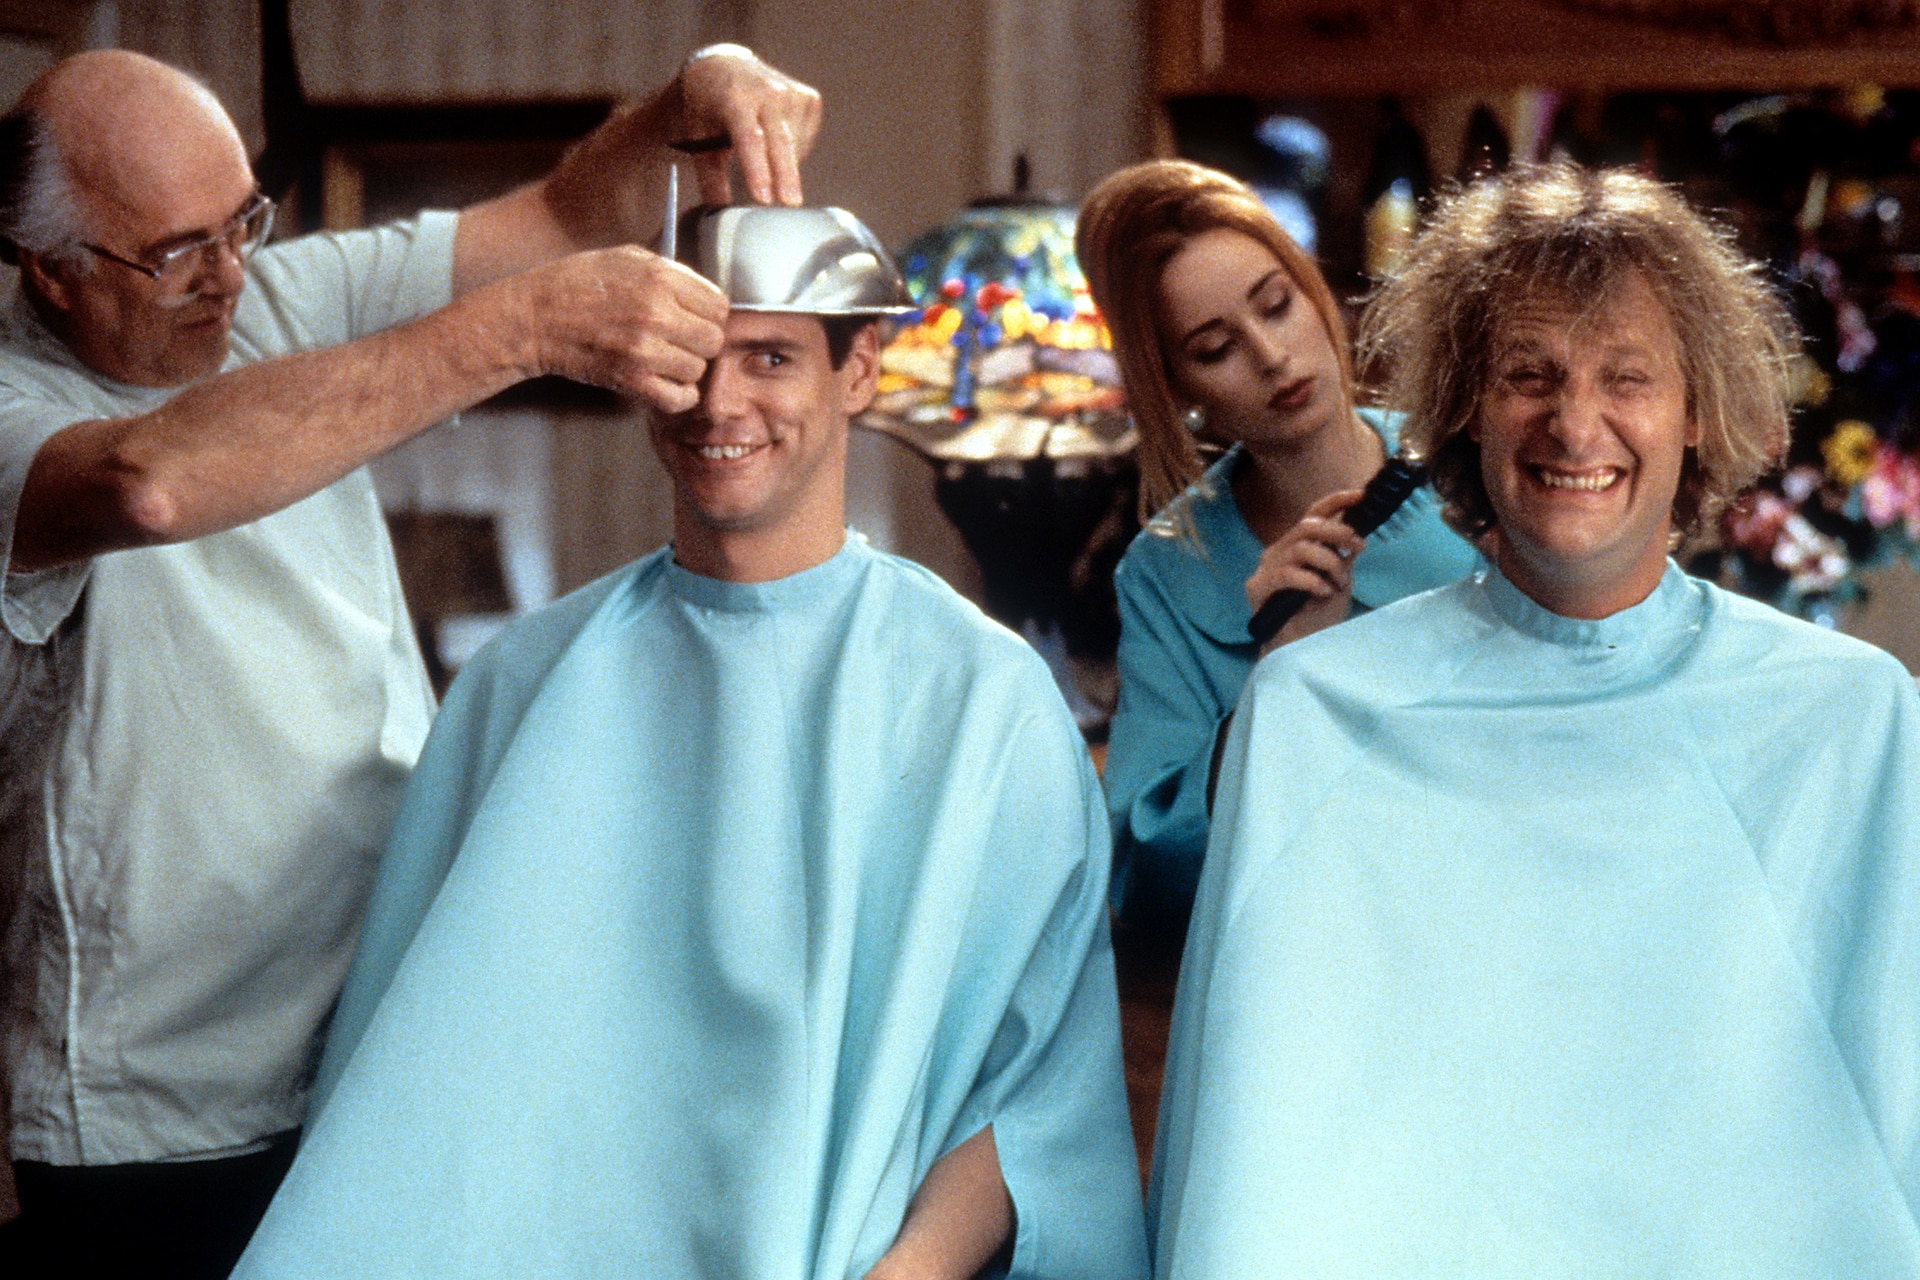 Jim Carrey and Jeff Daniels getting their hair cut in a scene from the film...